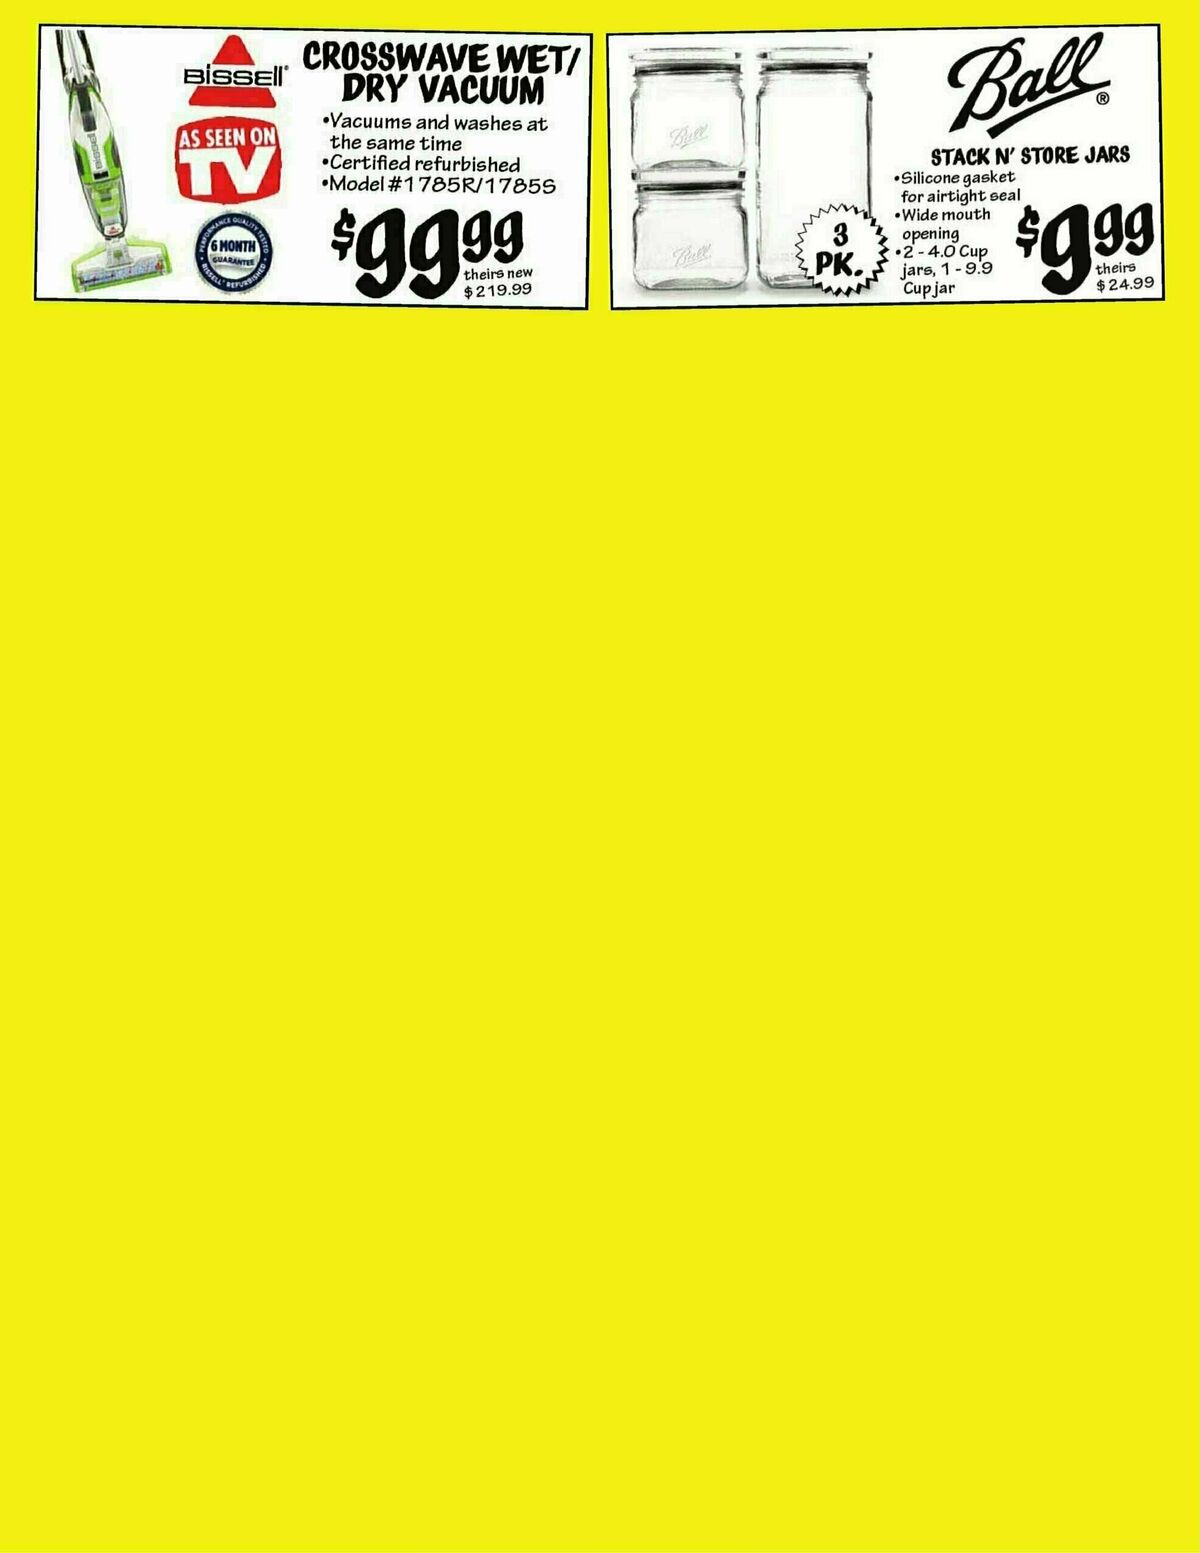 Ollie's Bargain Outlet Weekly Ad from August 4